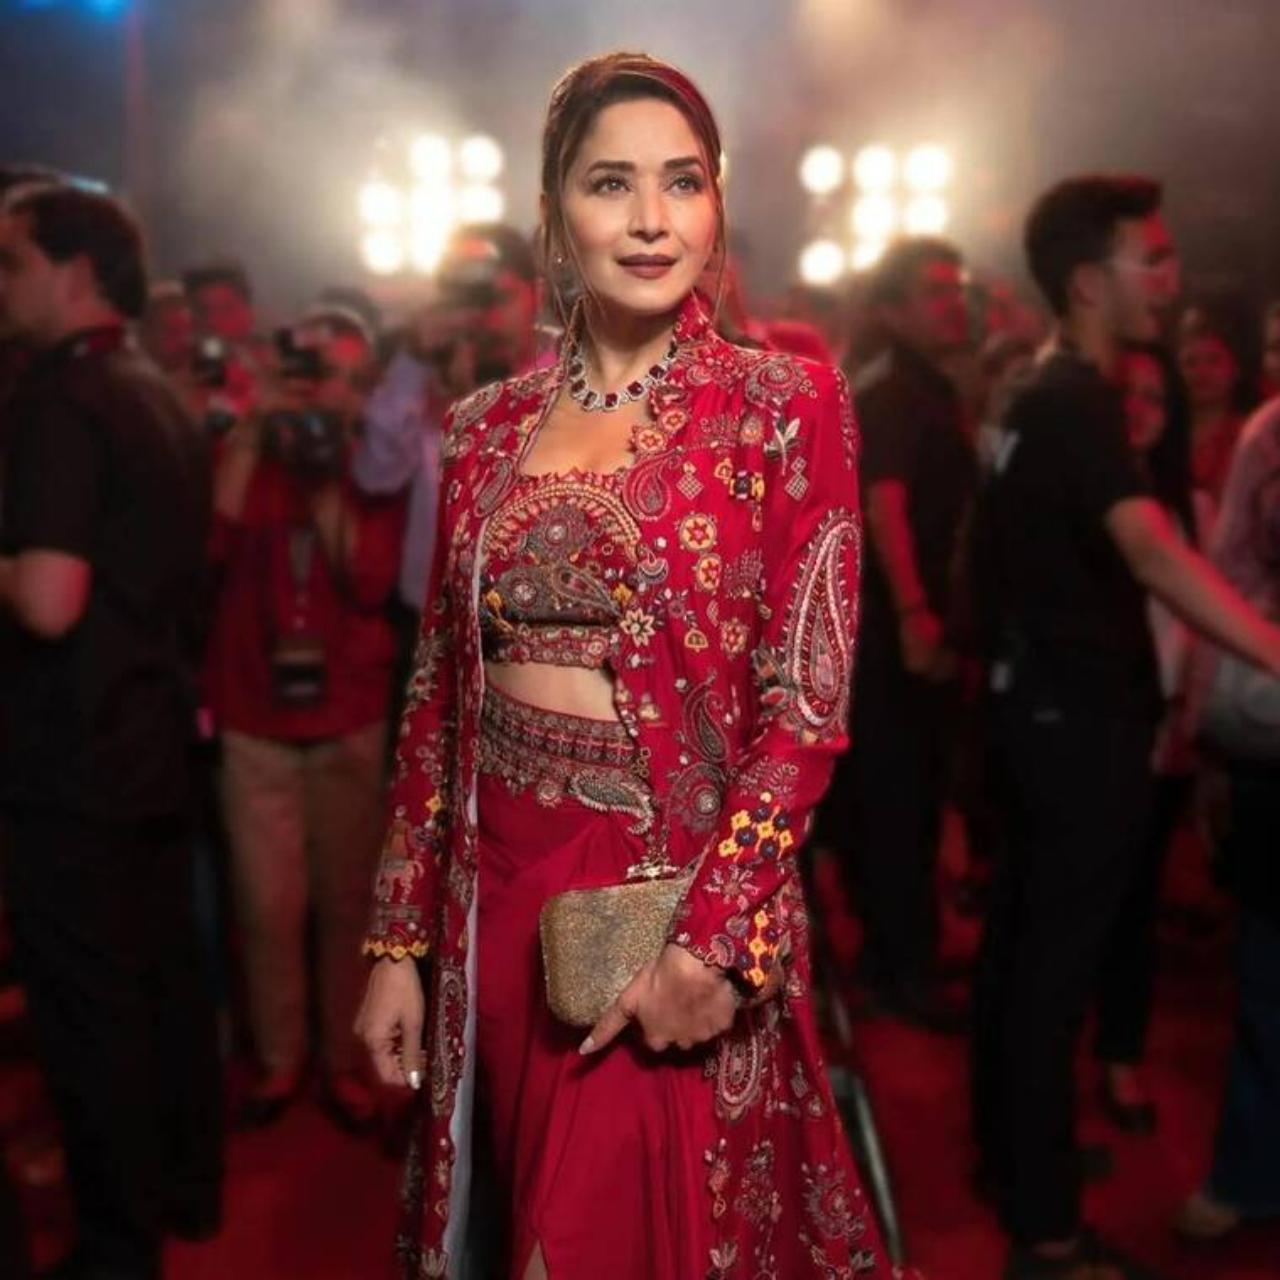 Madhuri Dixit in The Fame Game
Madhuri Dixit made her OTT debut with Netflix’s The Fame Game. The series explores the life of Anamika Anand (Dixit), a superstar actress who vanishes after an award show. The subsequent investigation leads to an uncovering of uncertainty, lies and guarded secrets